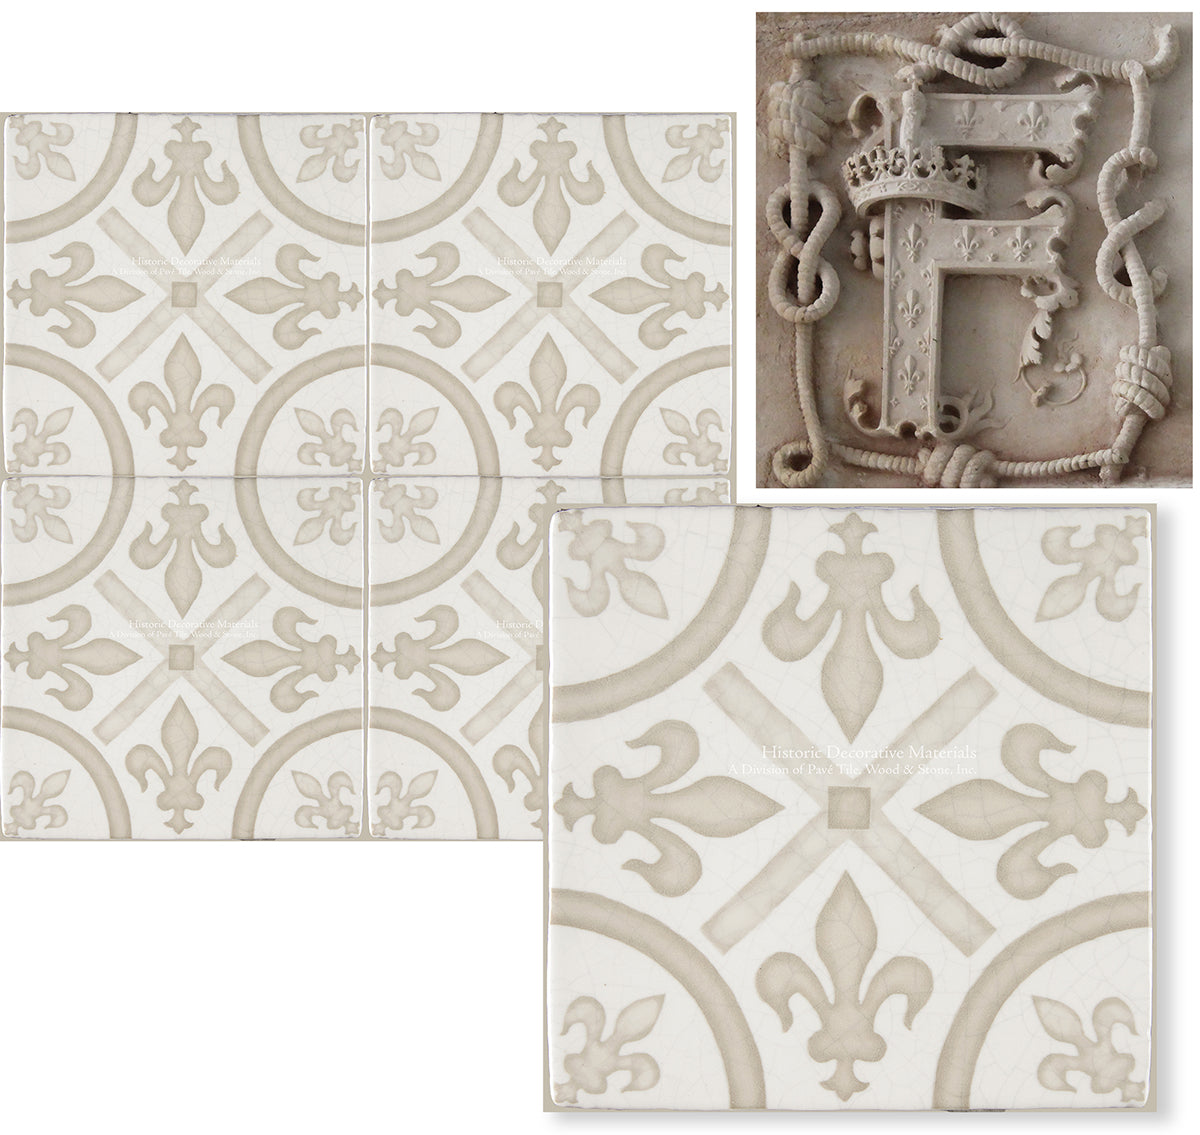 Historic Decorative Wall Tiles that are hand painted decorative wall tiles for kitchen backsplash, fireplace surround, bathroom wall tiles that interior designers choose for old world, farmhouse and luxury interiors